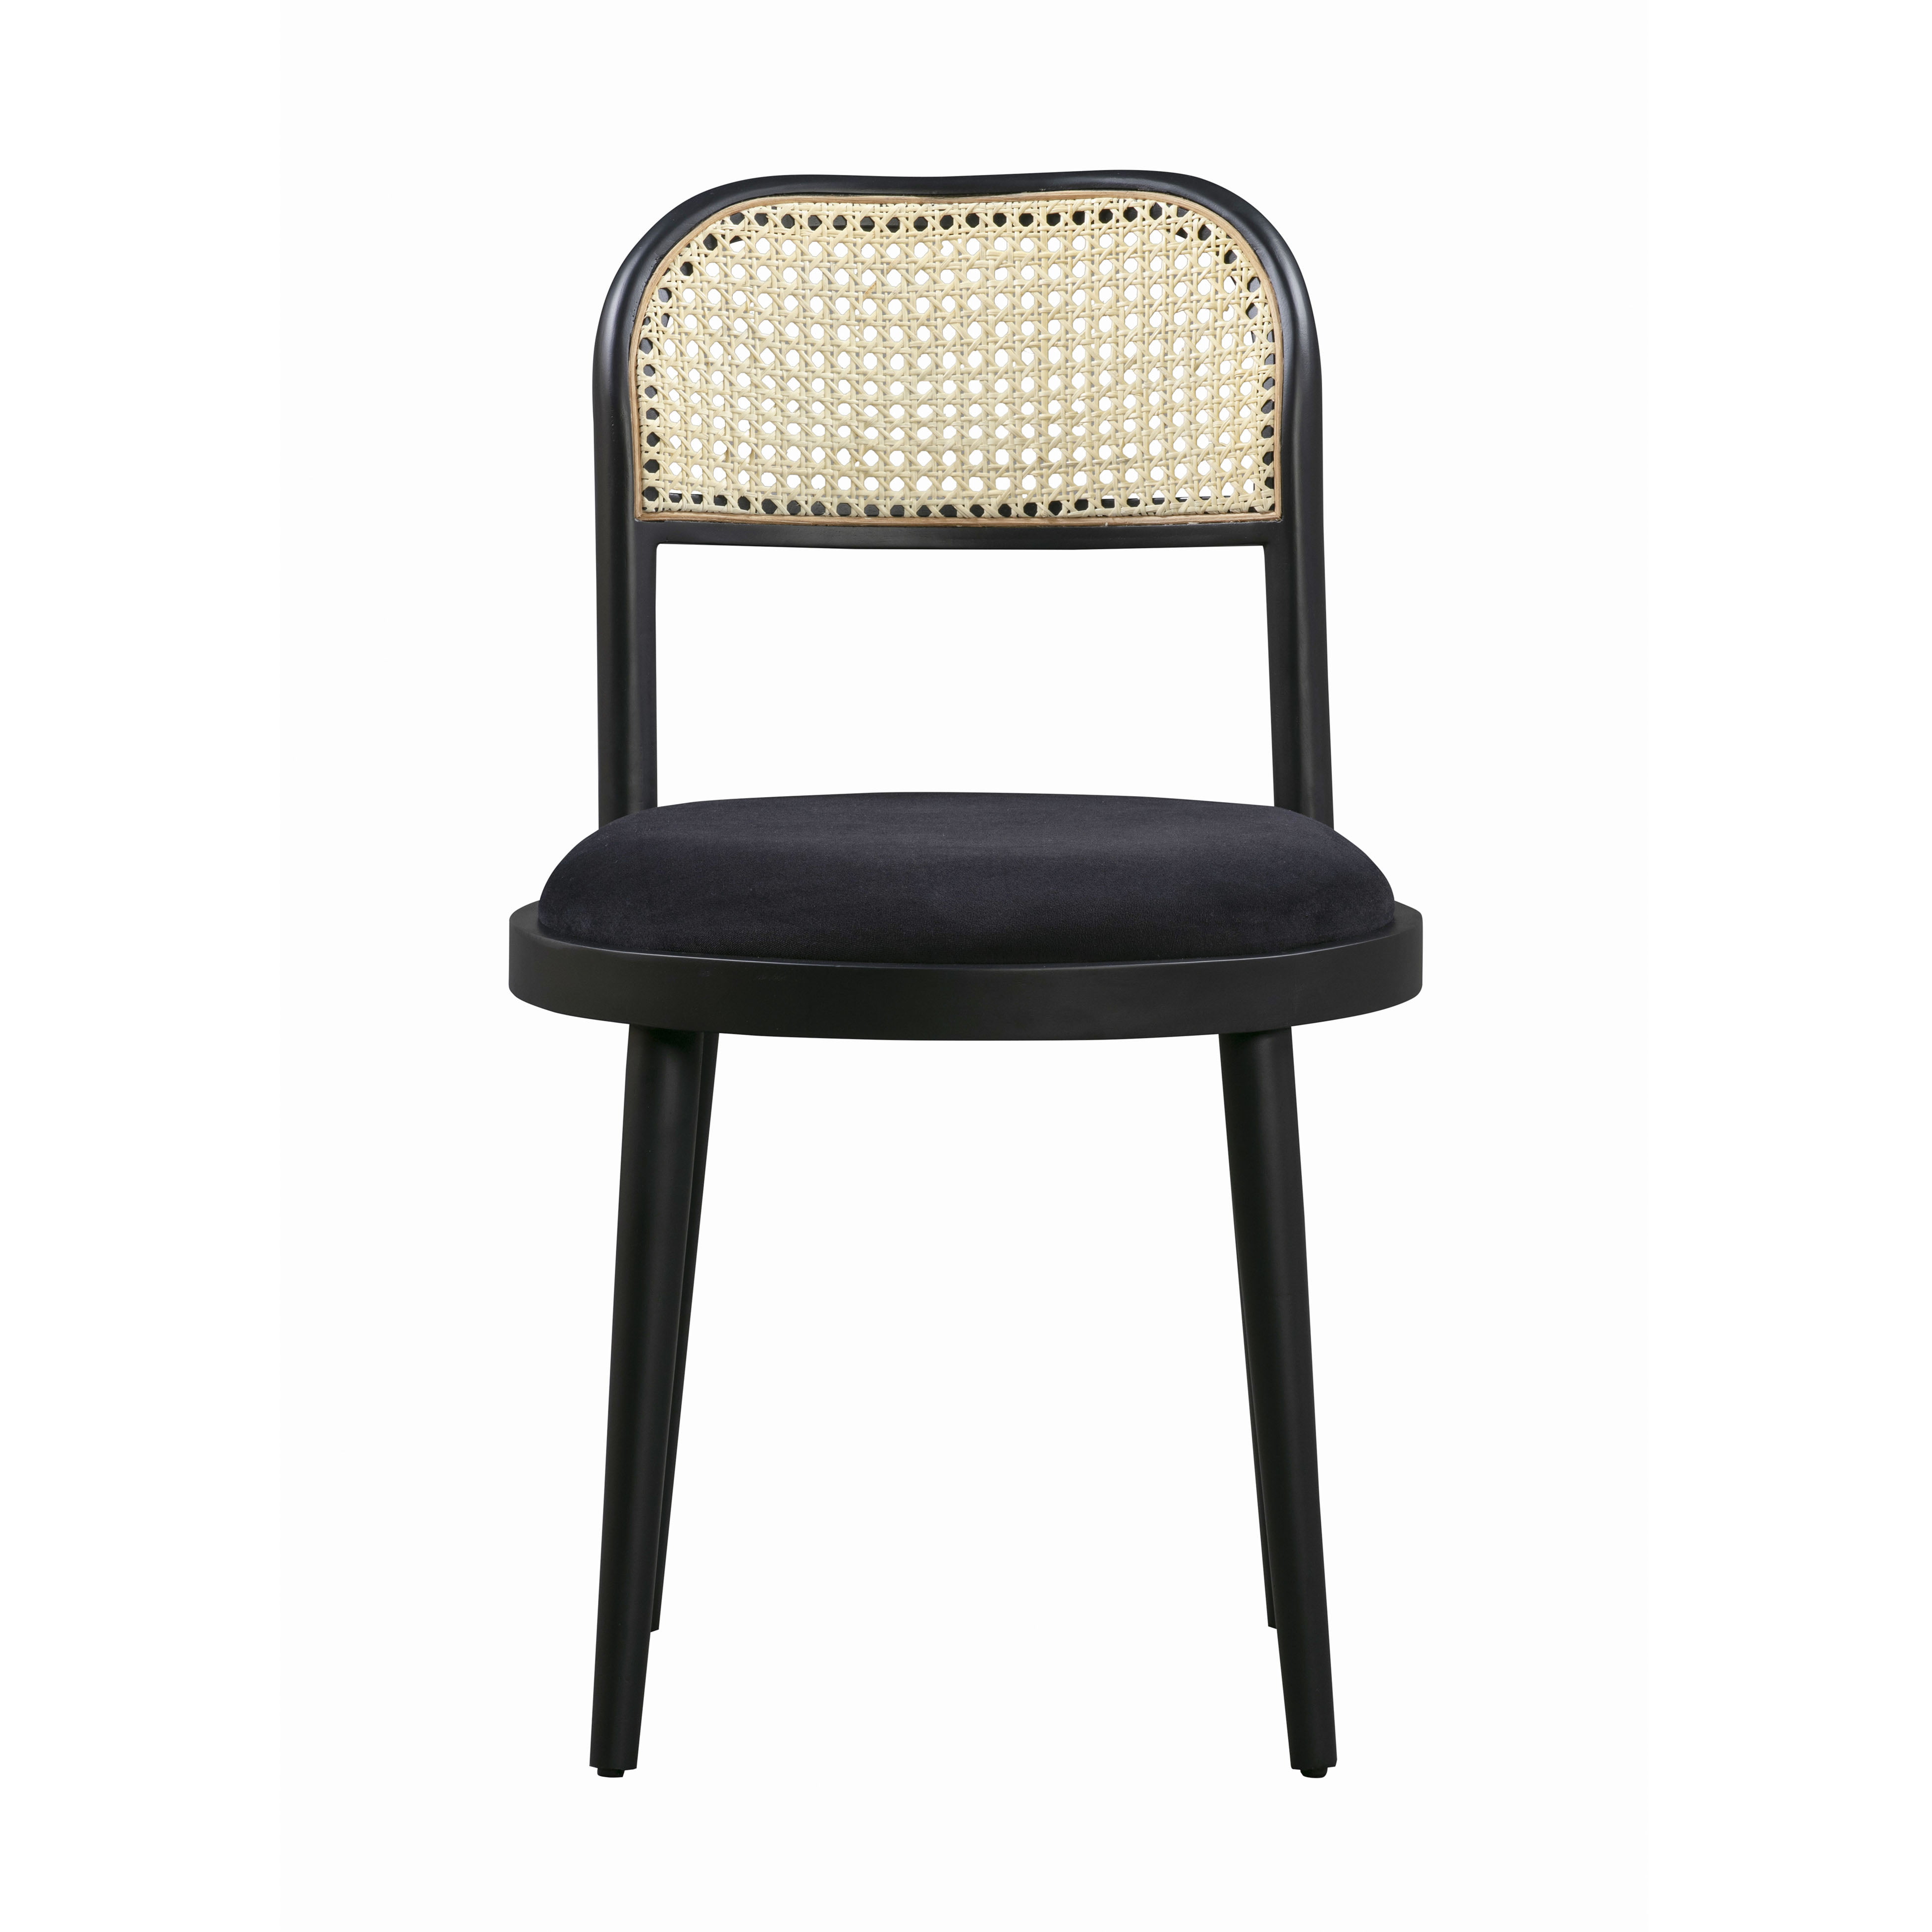 Black Velvet Seat Dining Chair, Cane Back Dining Chairs Black